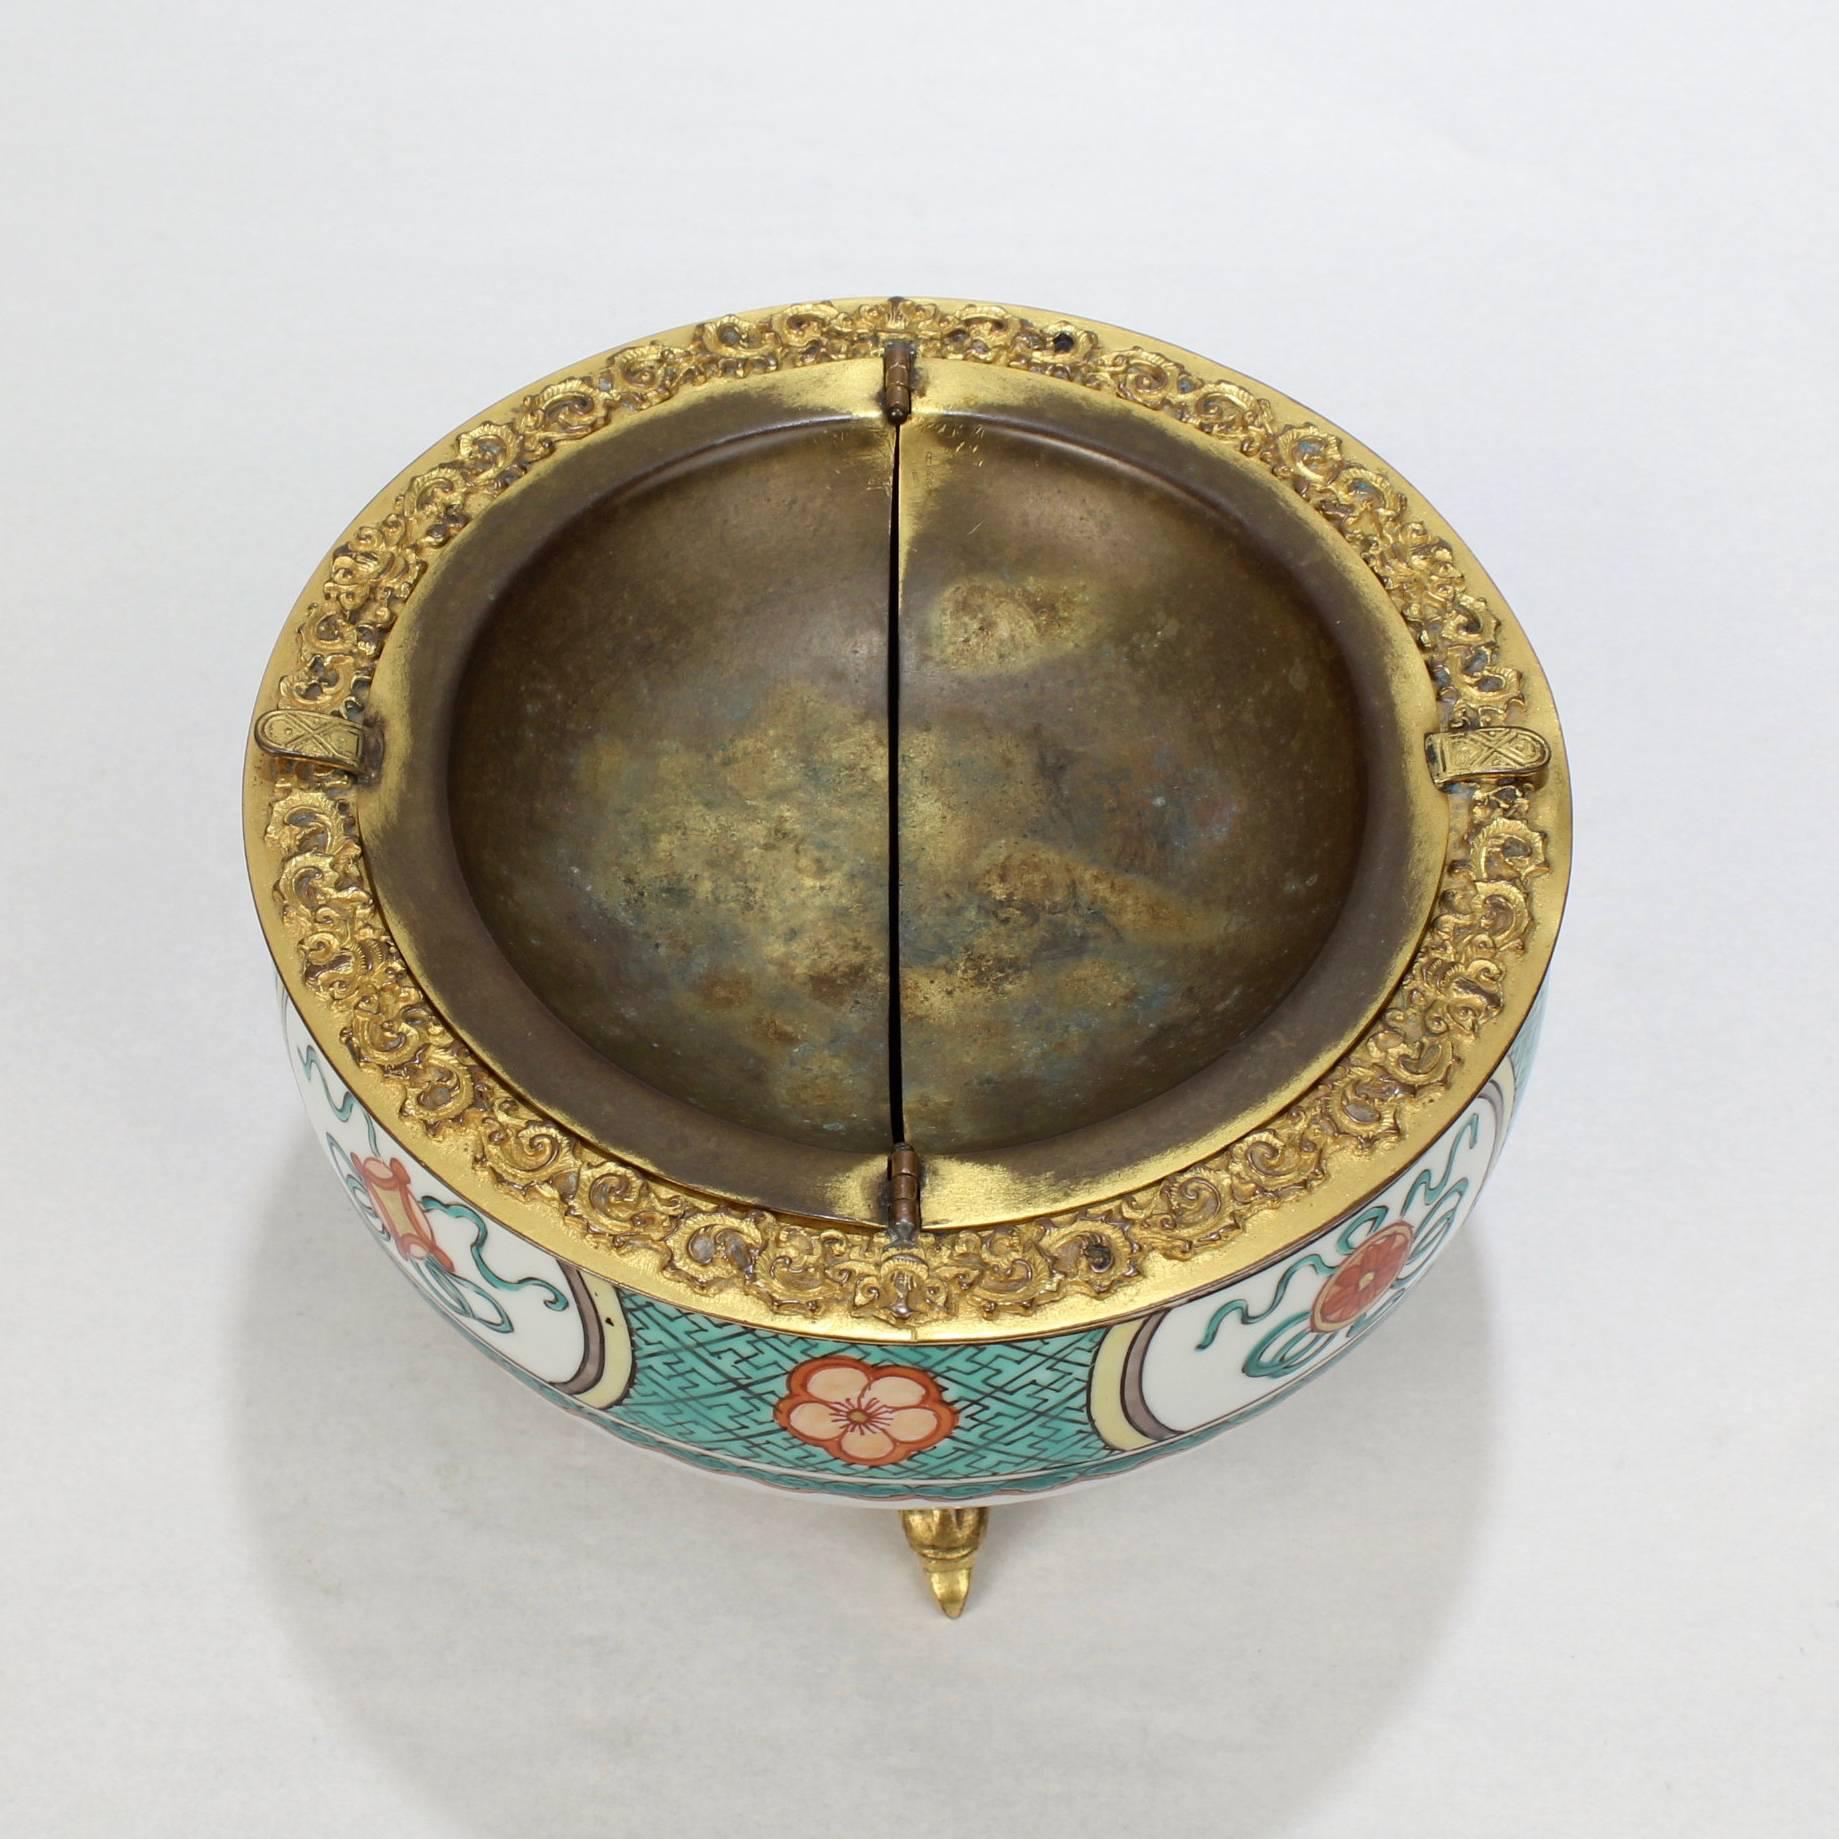 Victorian Gilded Age E F Caldwell Bronze-Mounted Chinese Export Porcelain Ashtray